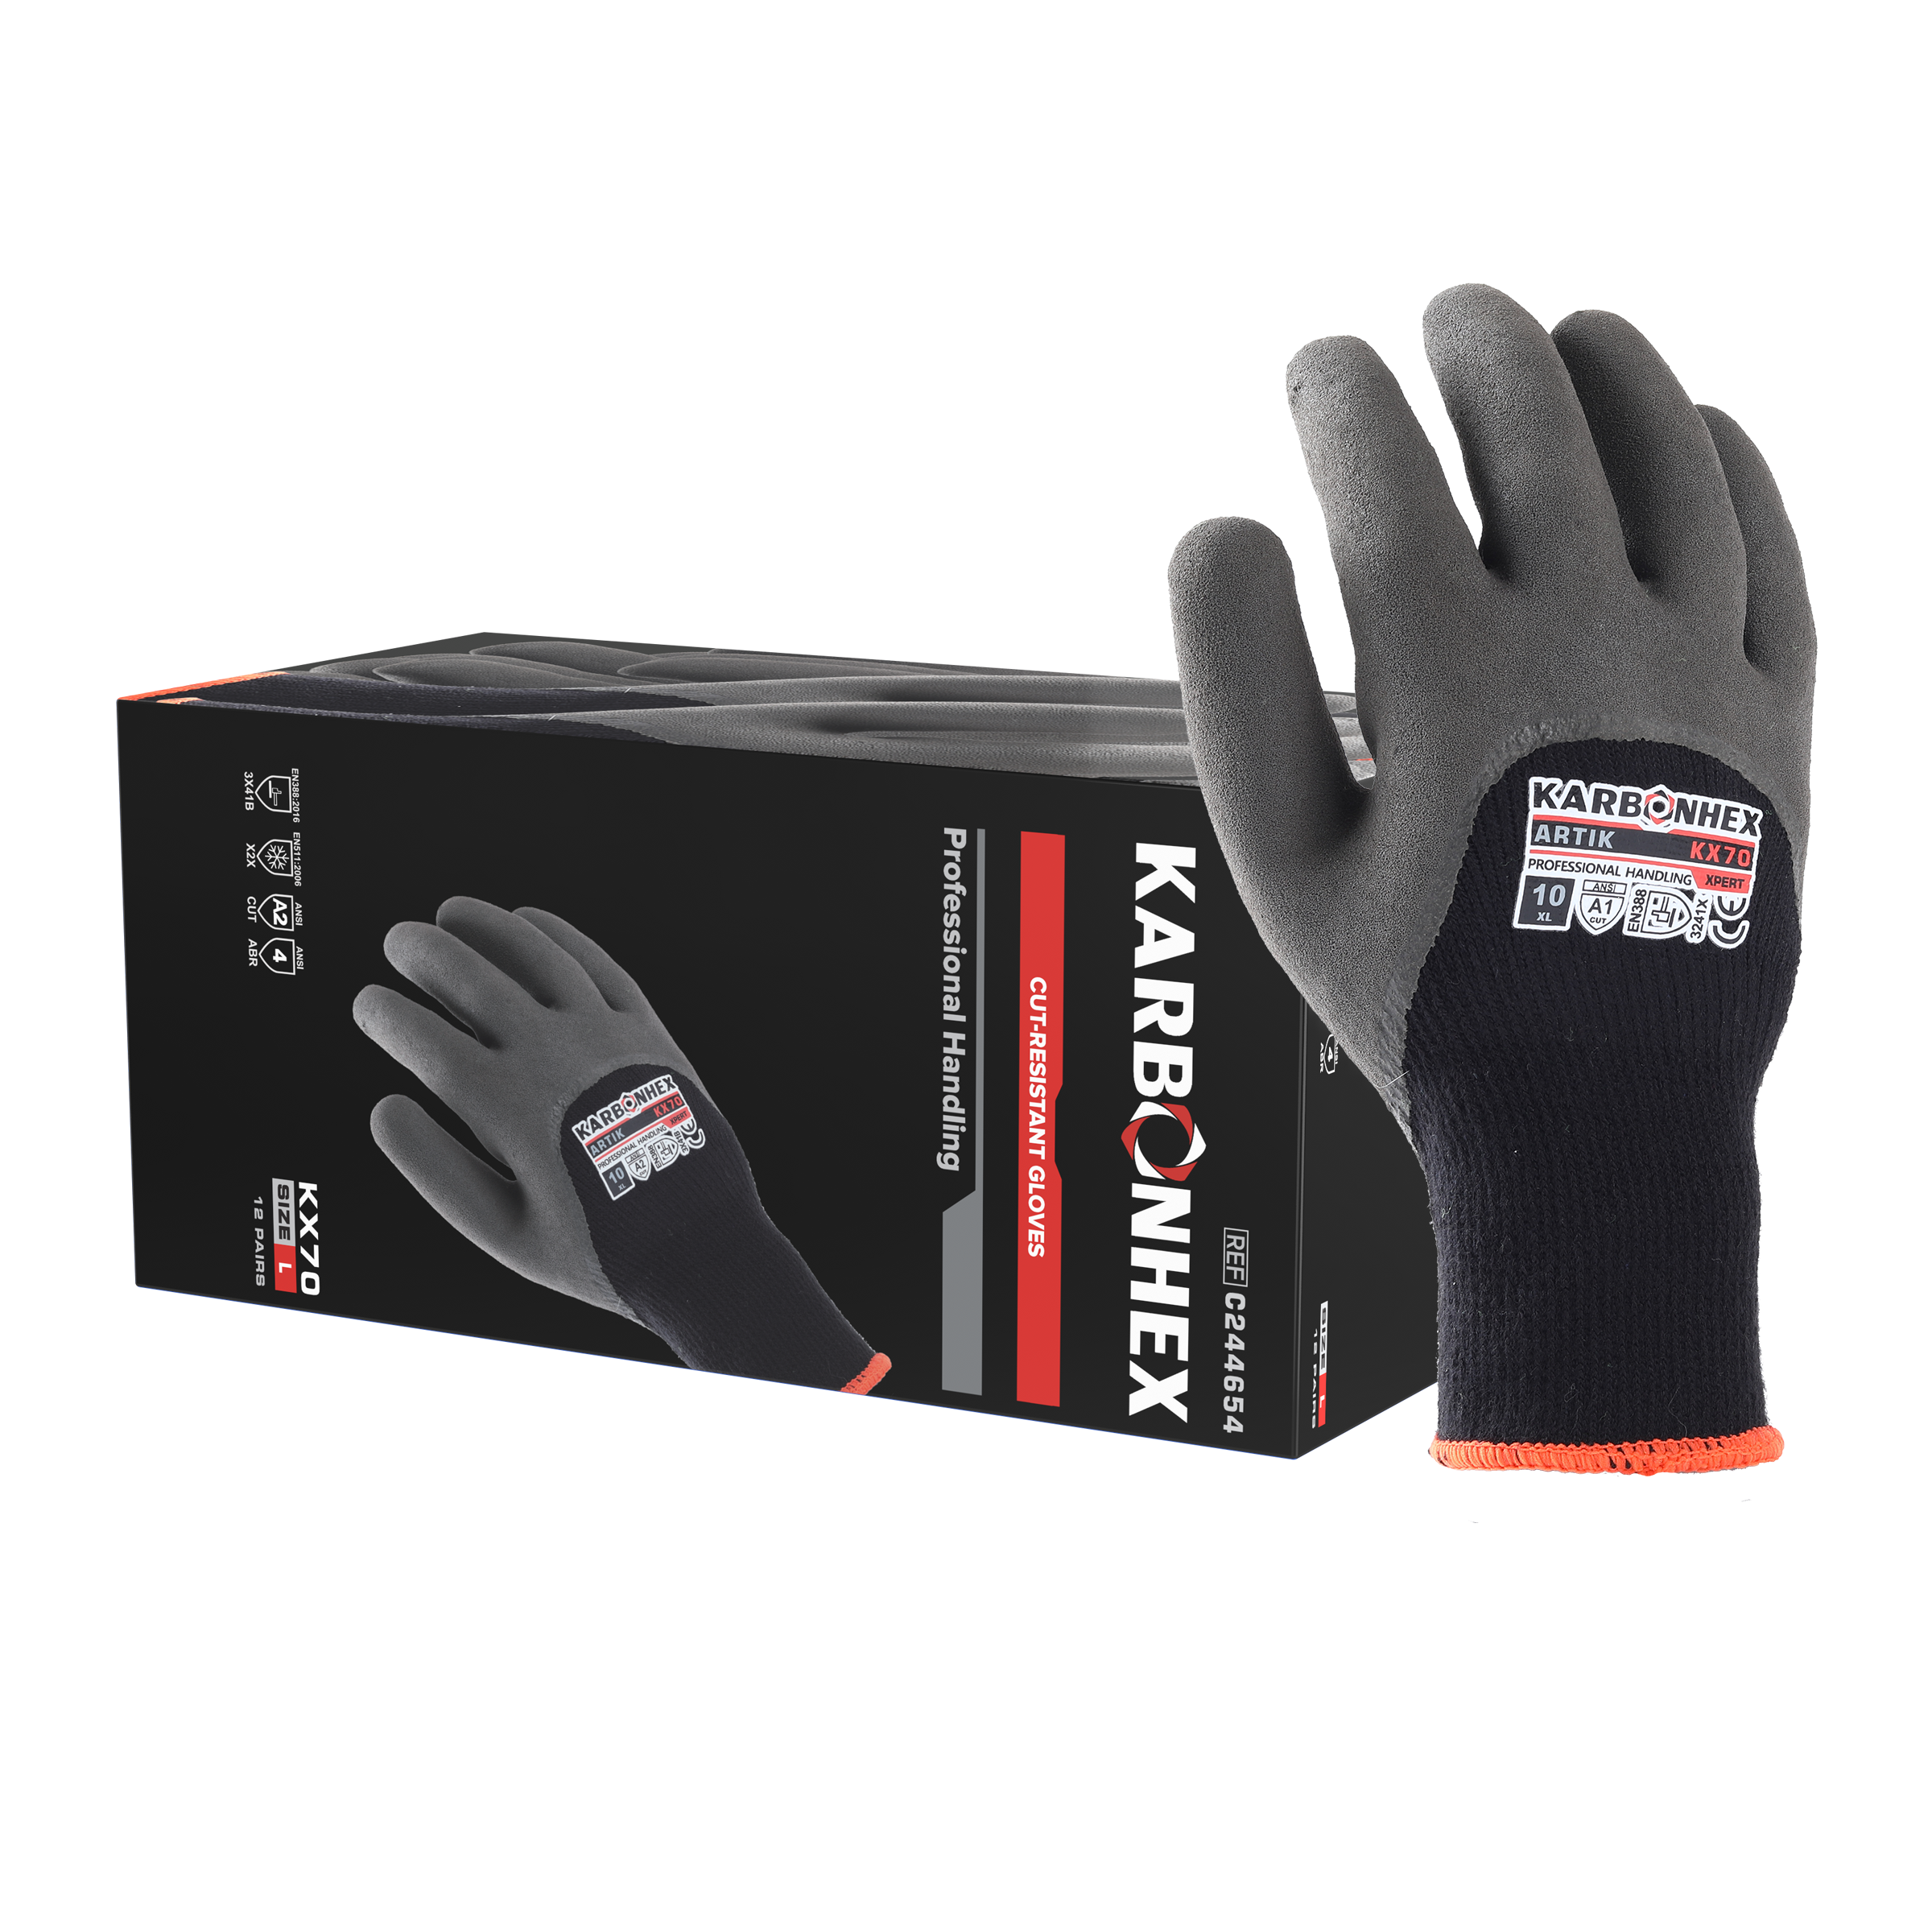 KarbonHex® KX70 by SW® Professional Built Cut-Resistant Winter Gloves with Cold Protection (12 Pairs Per Box)